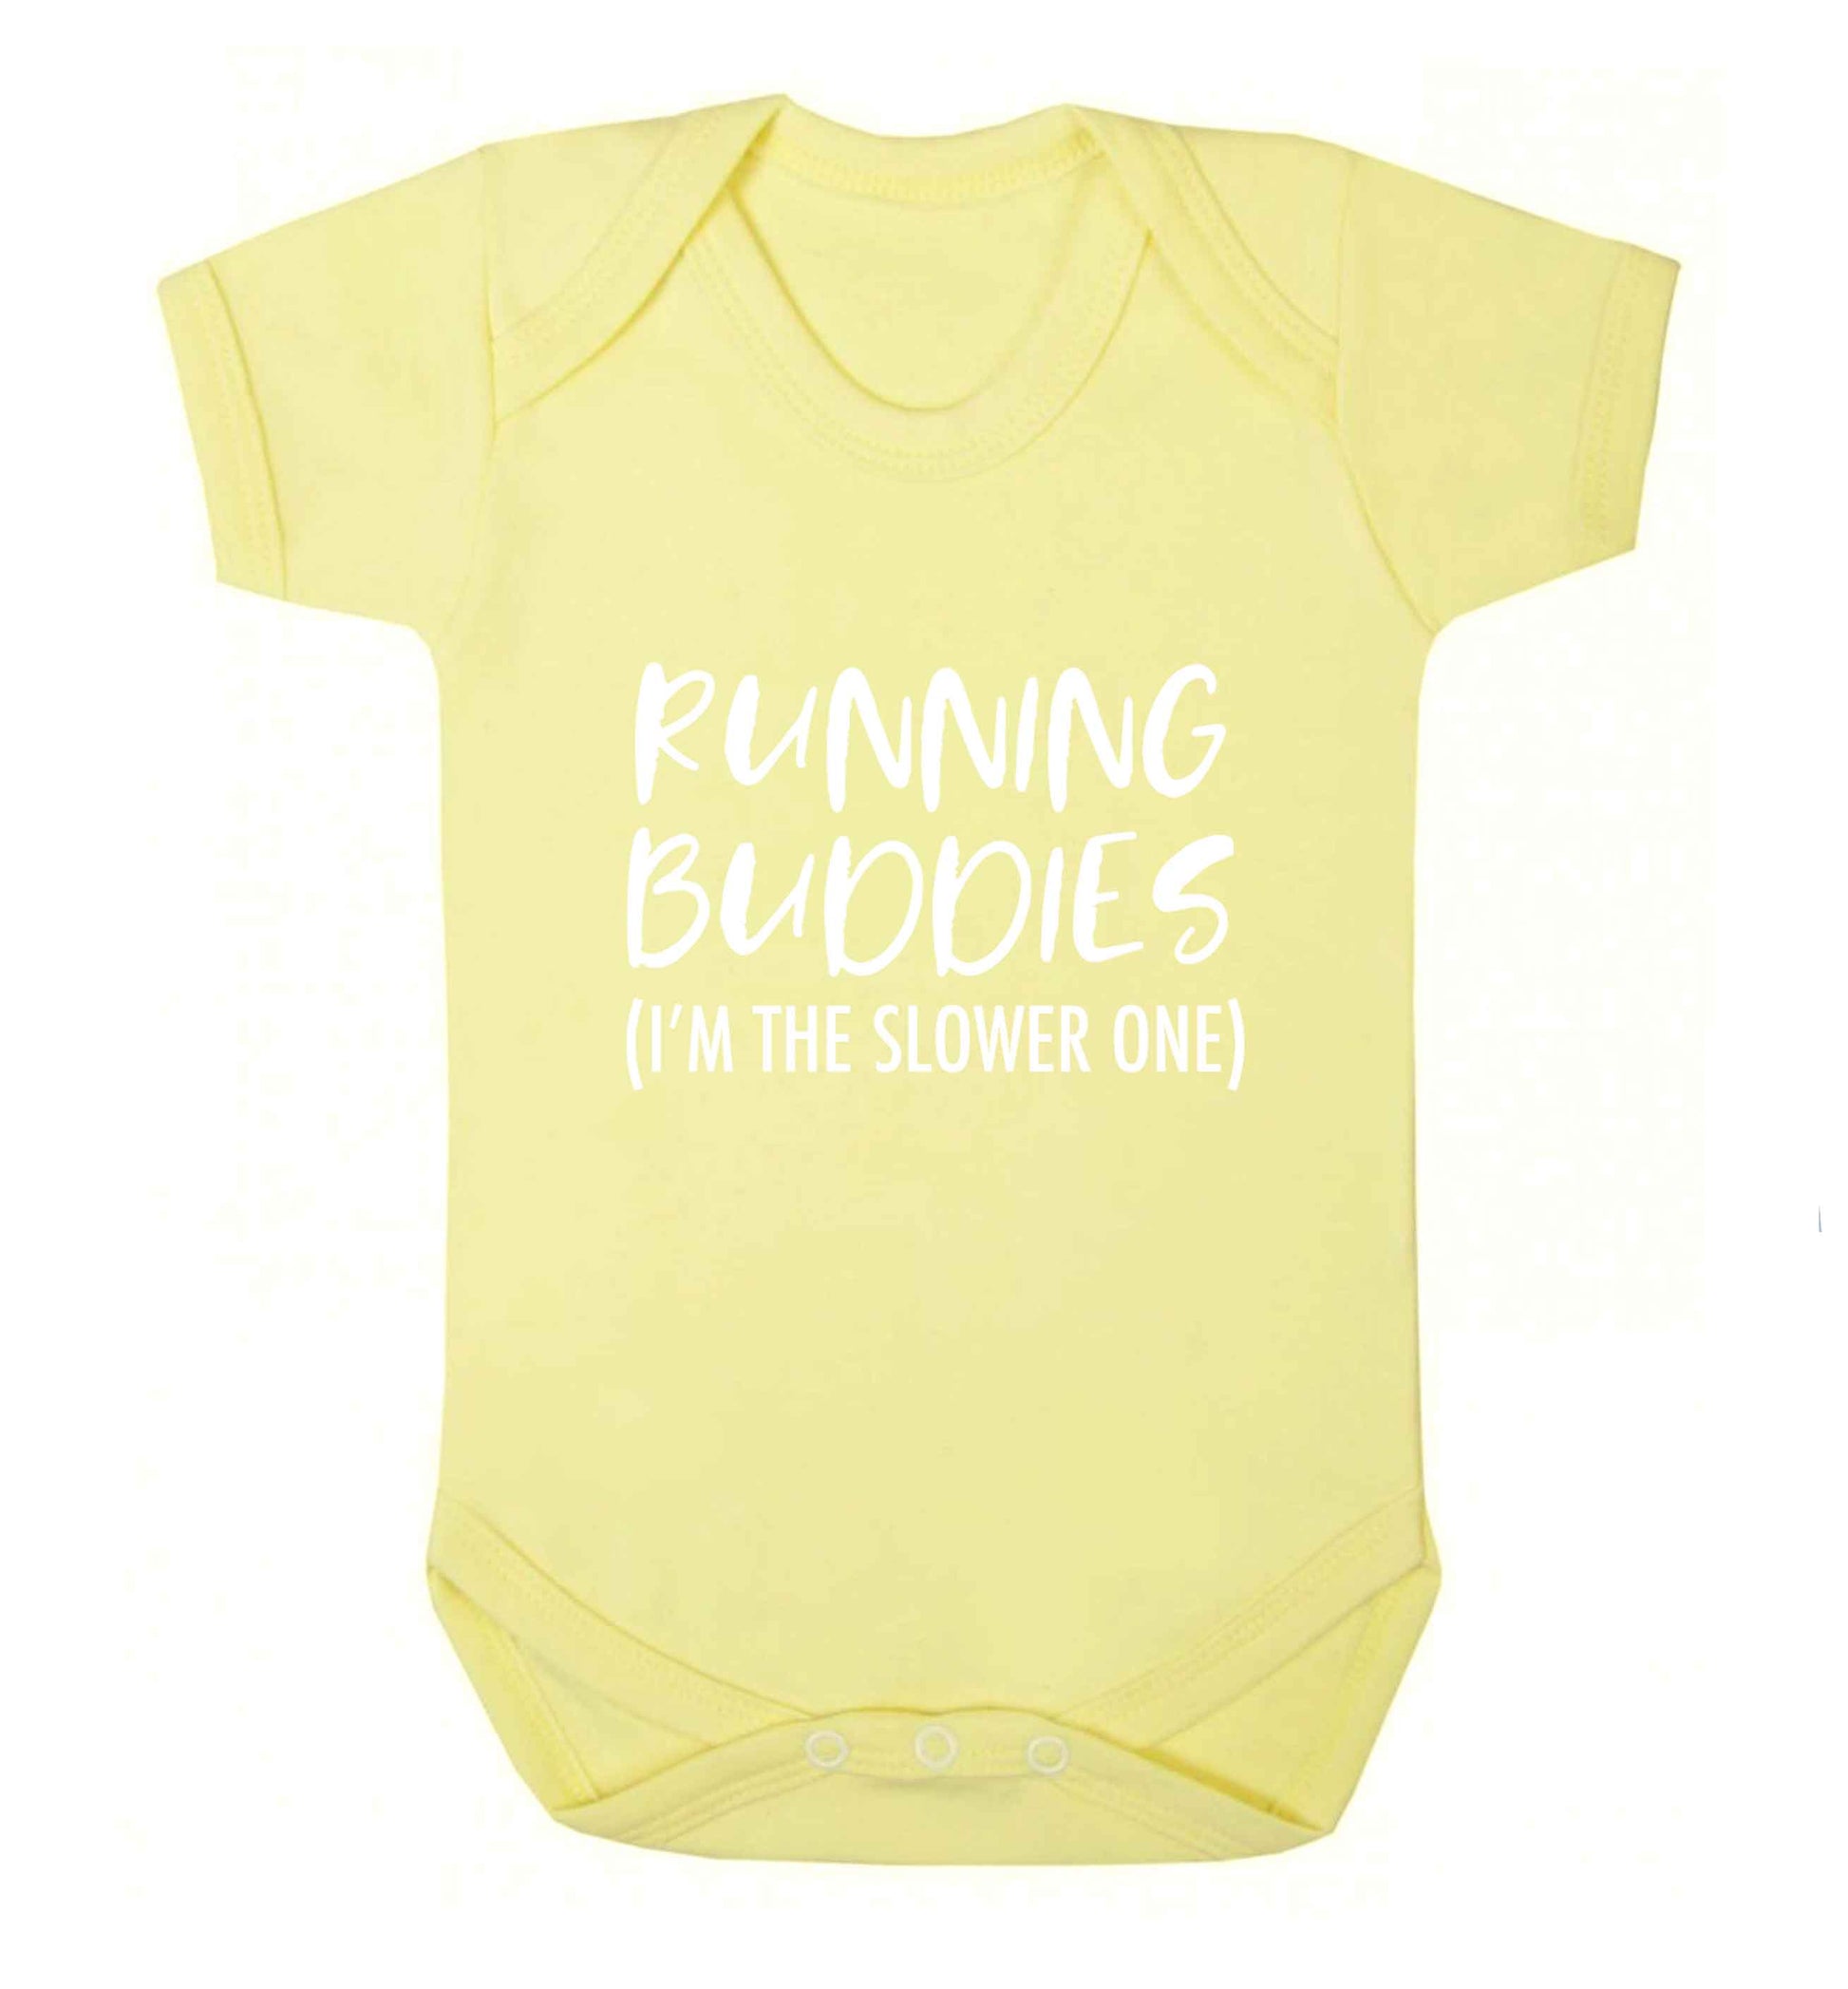 Running buddies (I'm the slower one) baby vest pale yellow 18-24 months